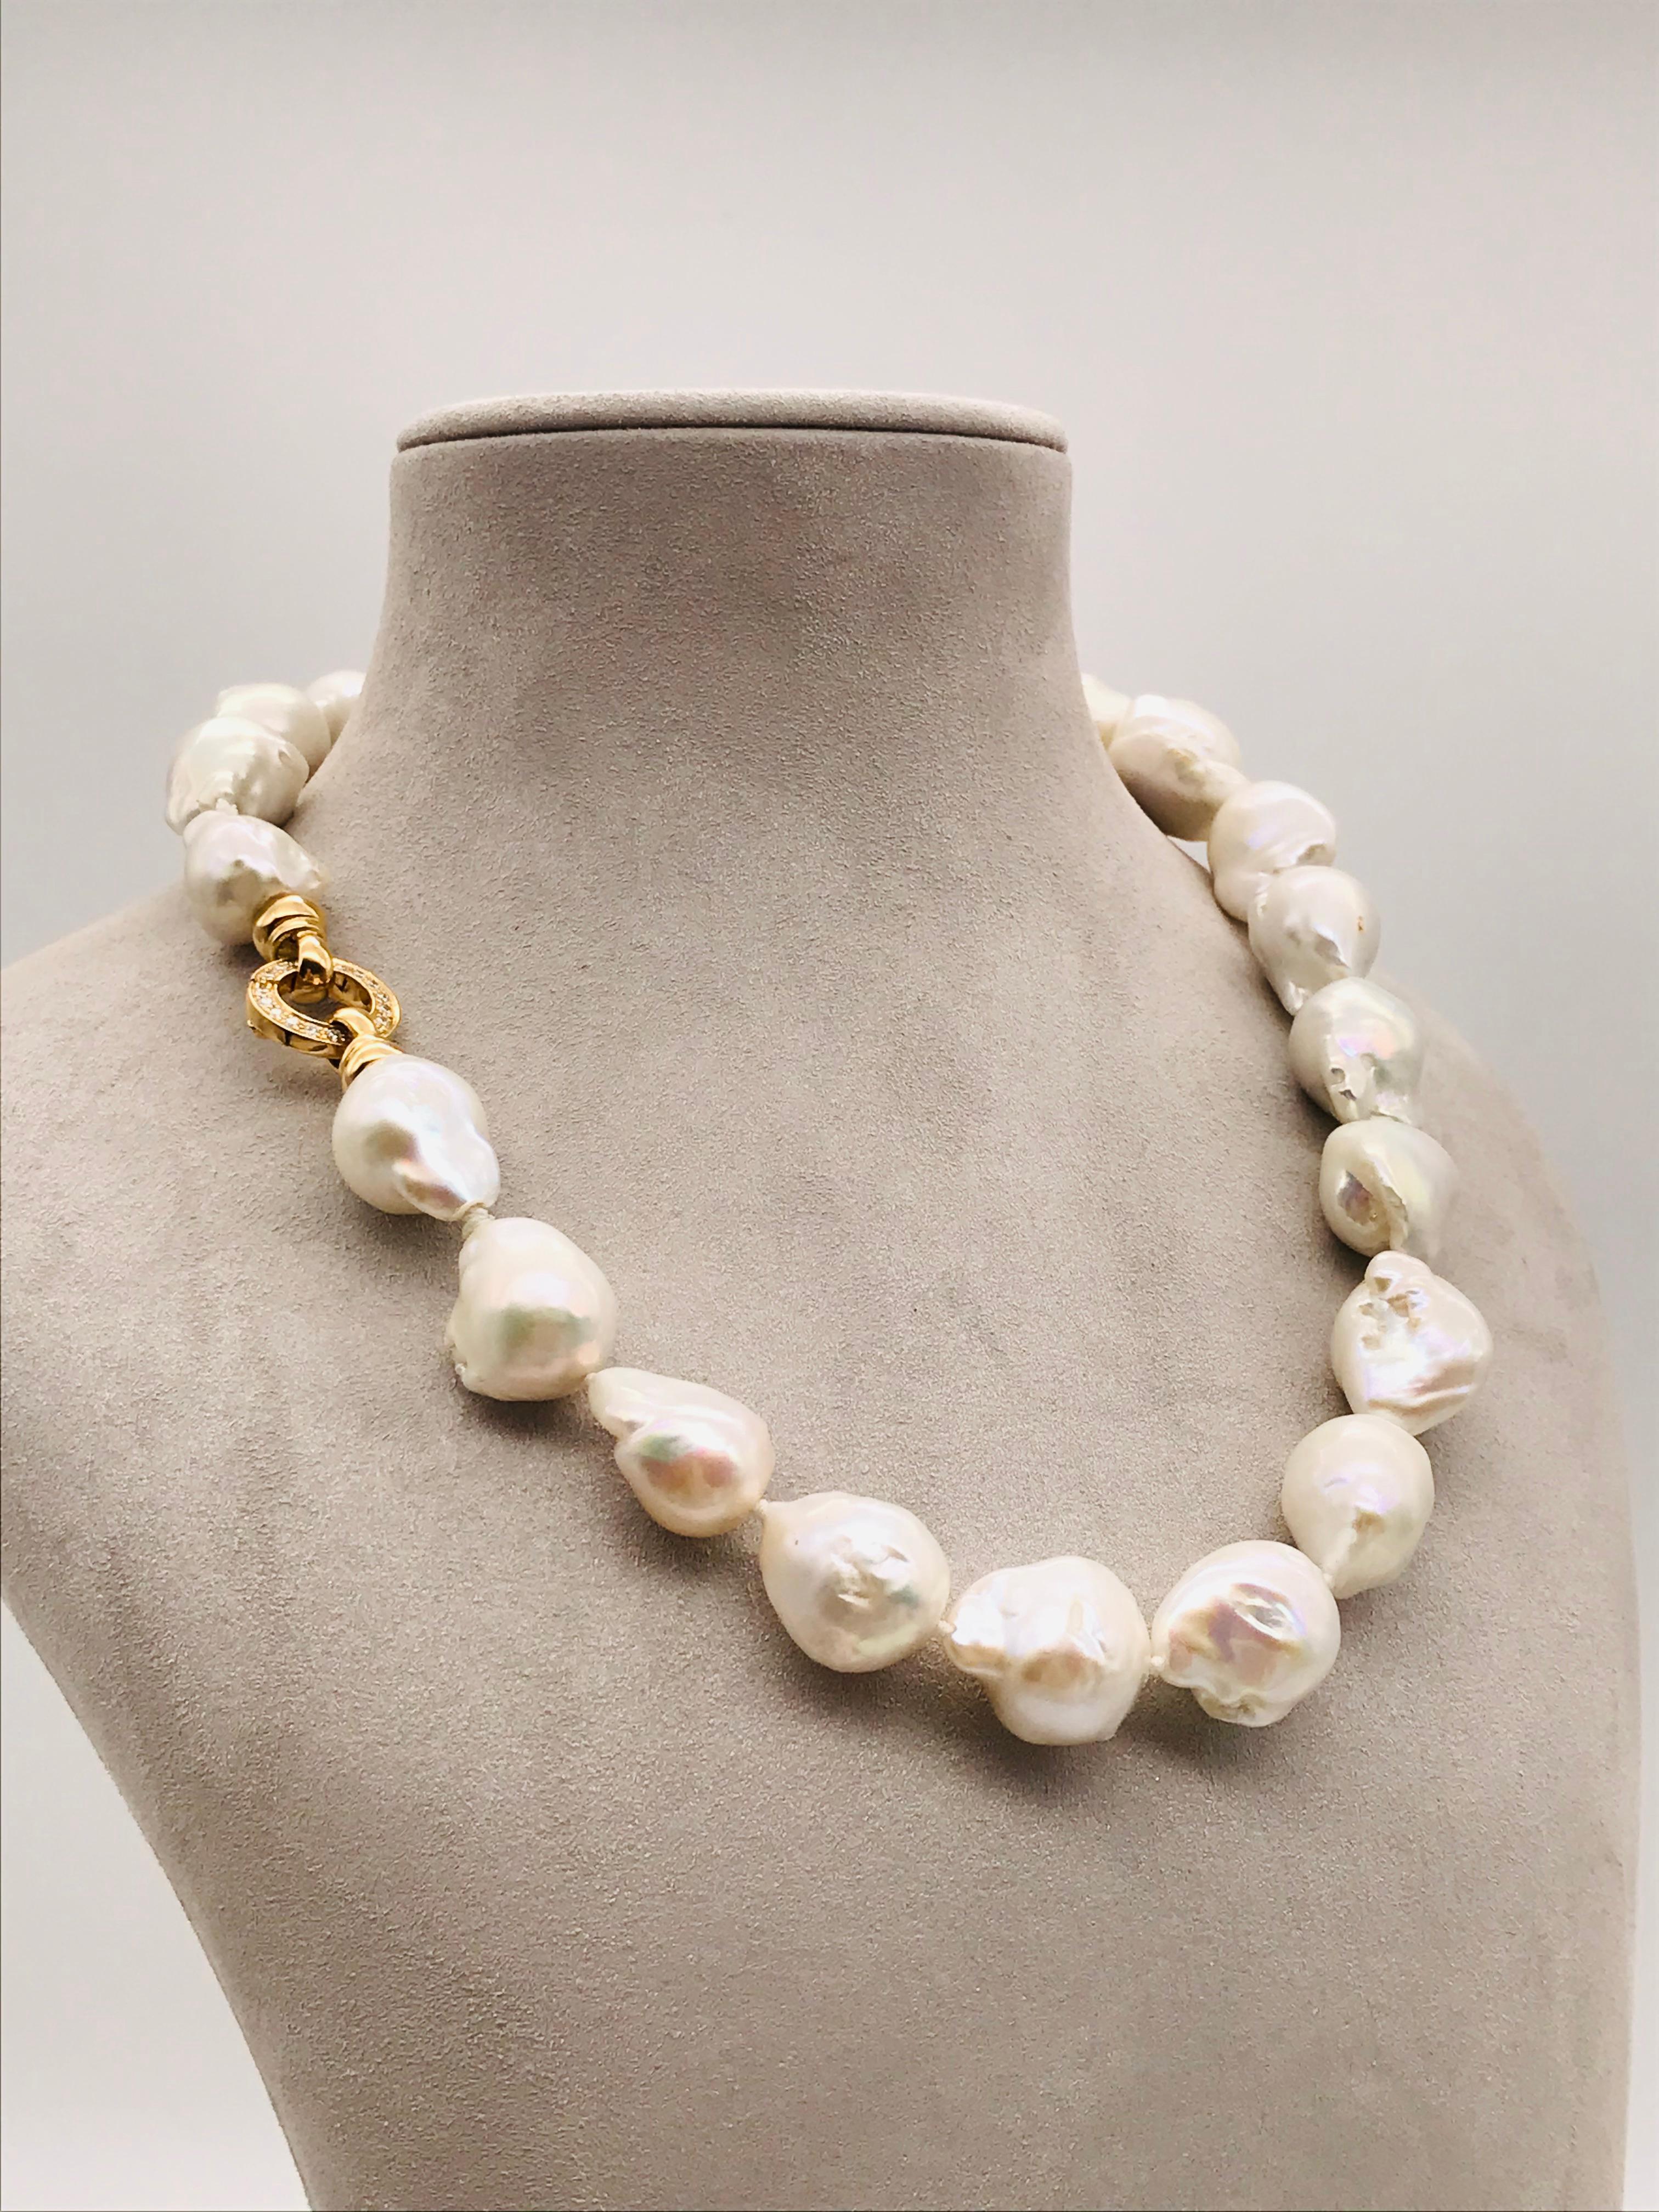 Baroques Pearls Necklaces with Gold and Diamonds Clasp 2